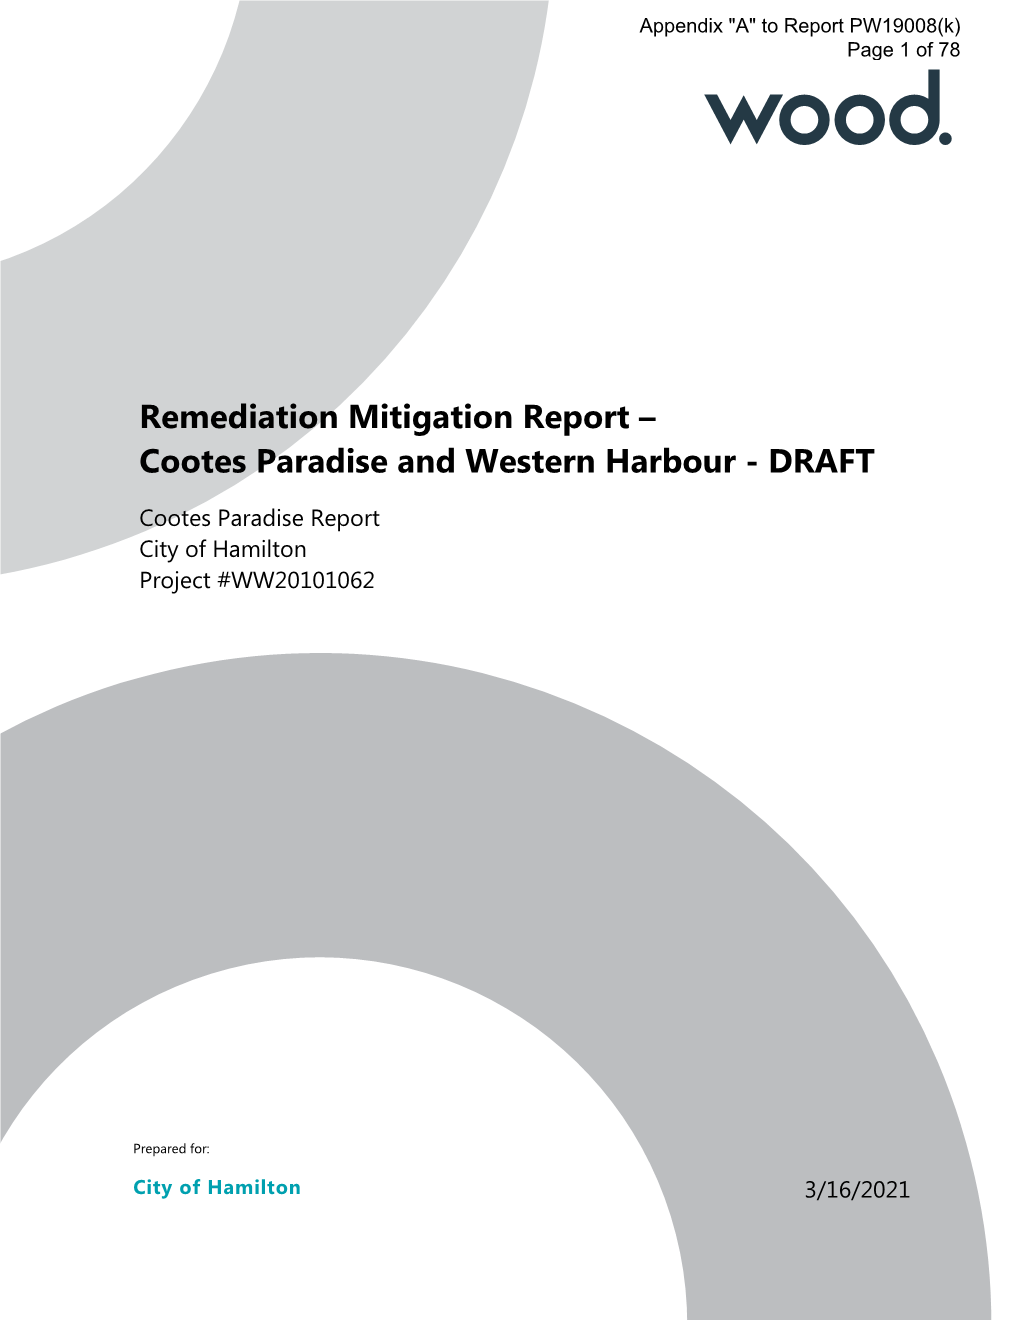 Remediation Mitigation Report – Cootes Paradise and Western Harbour - DRAFT